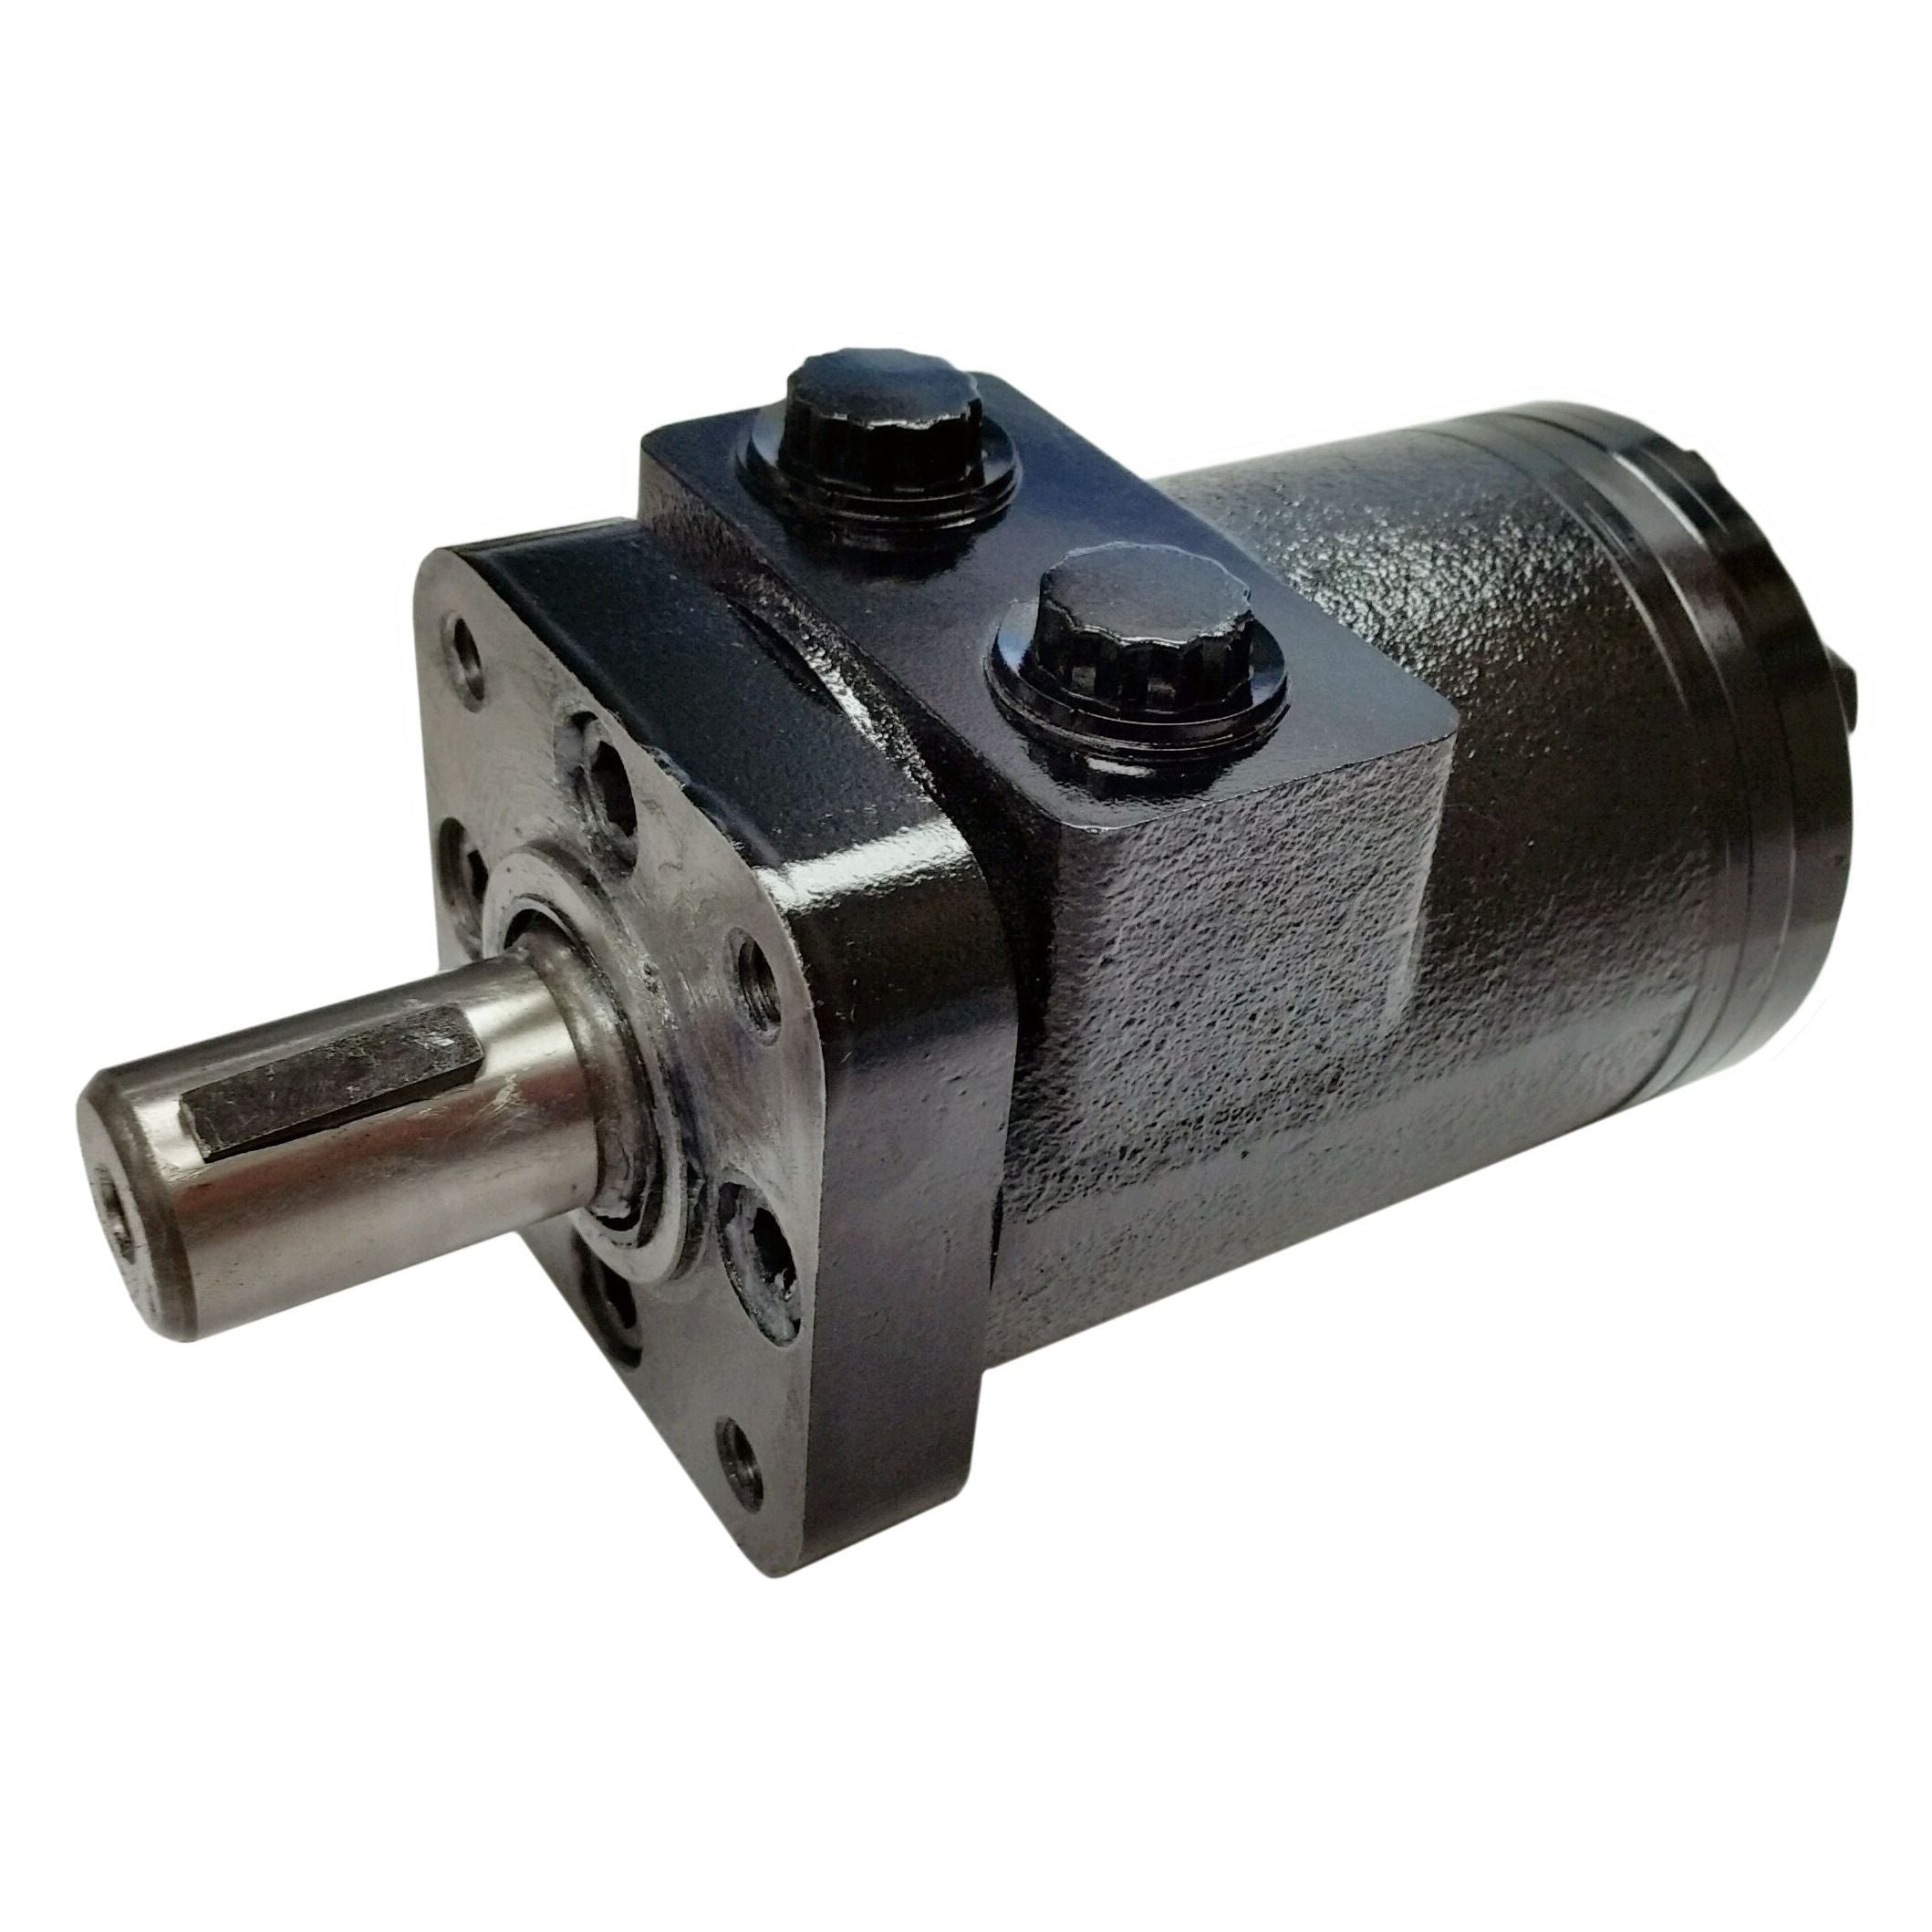 BMPH-100-H4-S-S : Dynamic LSHT Motor, 96.2cc, 615RPM, 1611in-lb, 2031psi Differential, 15.85GPM, SAE A 4-Bolt Mount, 6-Tooth Shaft, Side Ported, #10 SAE (5/8")